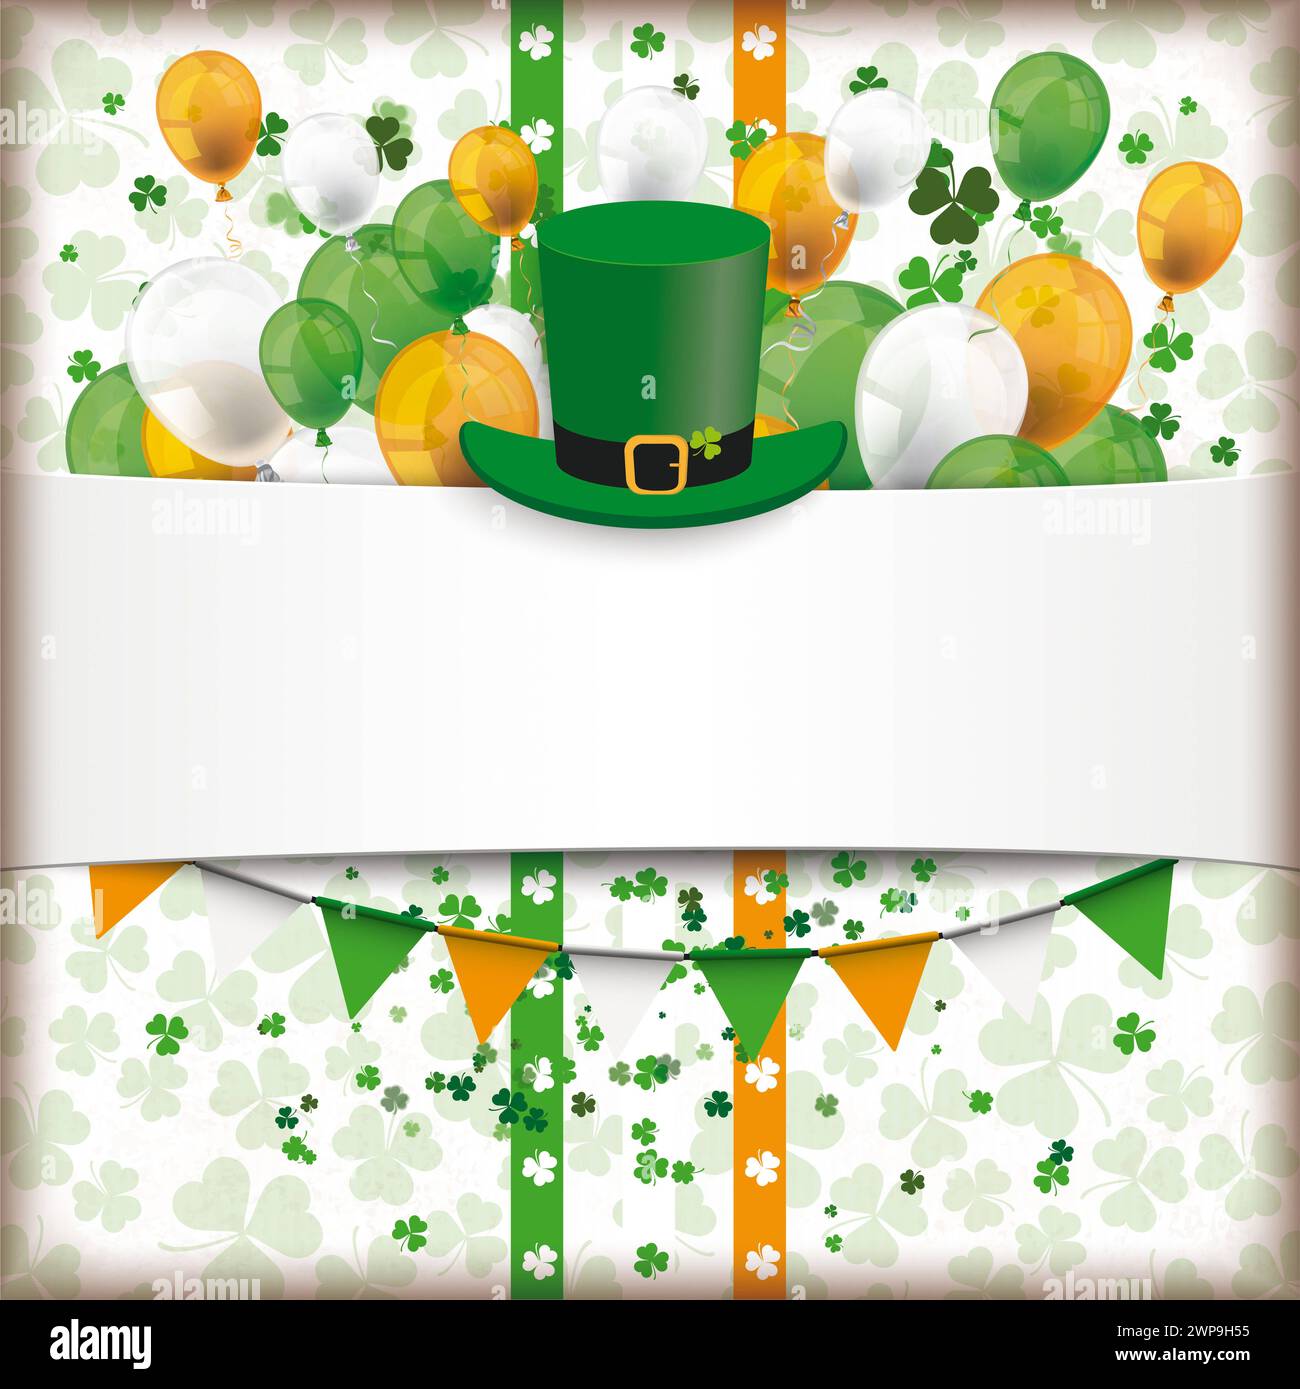 Empty St Patricks Day Shamrock White Cover Balloons Garlands Vintage cover with for St. Patrick s Day. Stock Photo